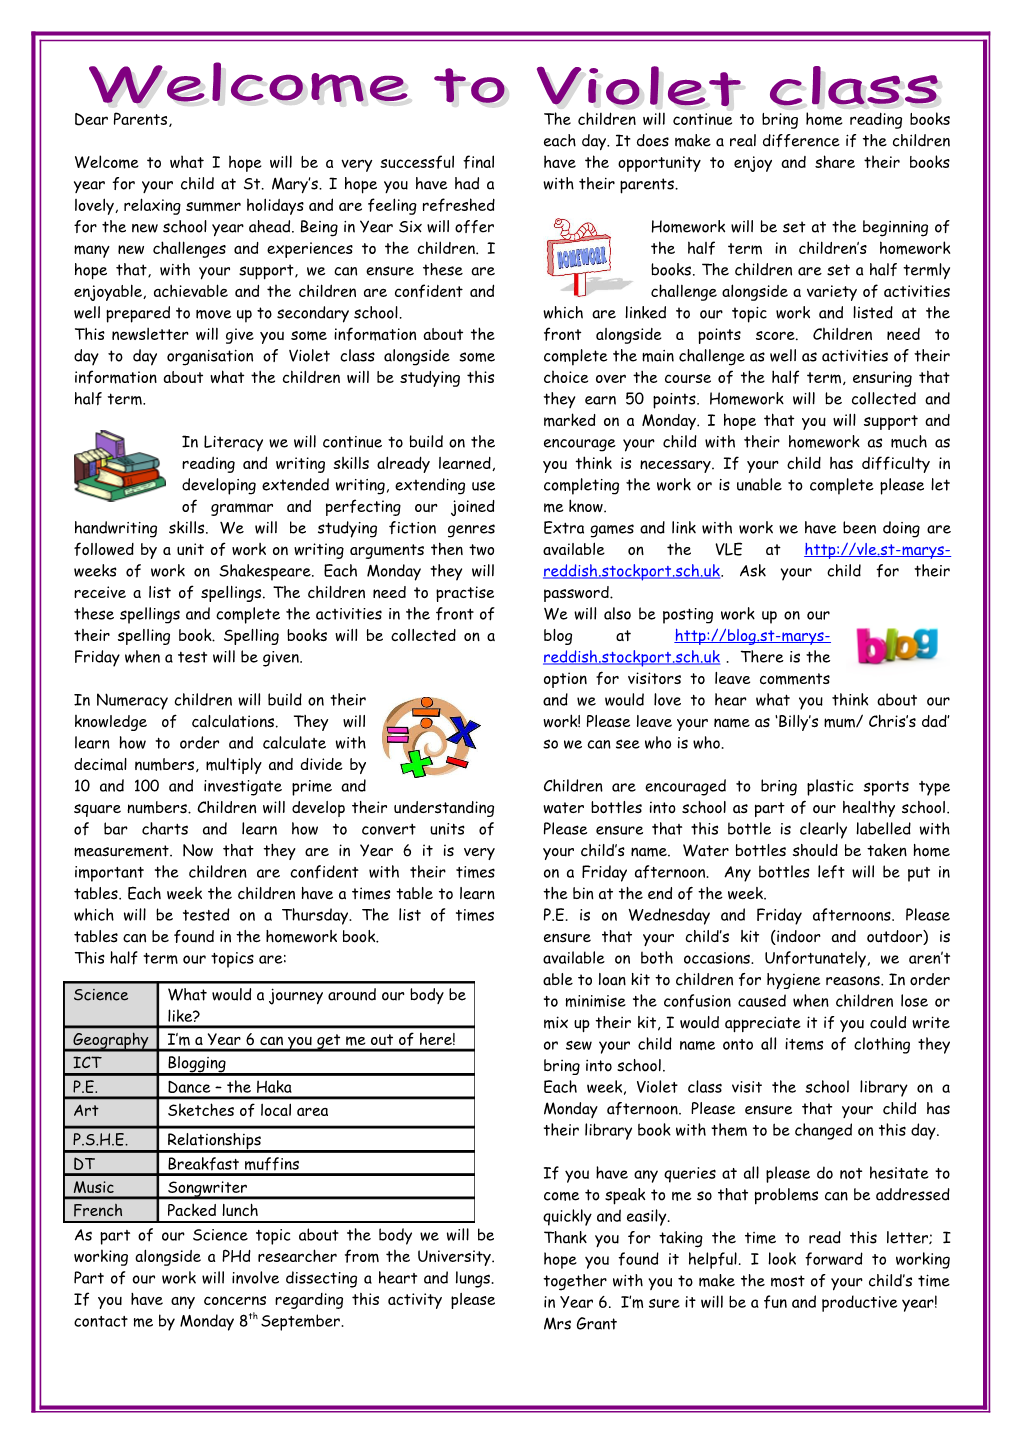 This Newsletter Will Give You Some Information About the Day to Day Organisation of Violet